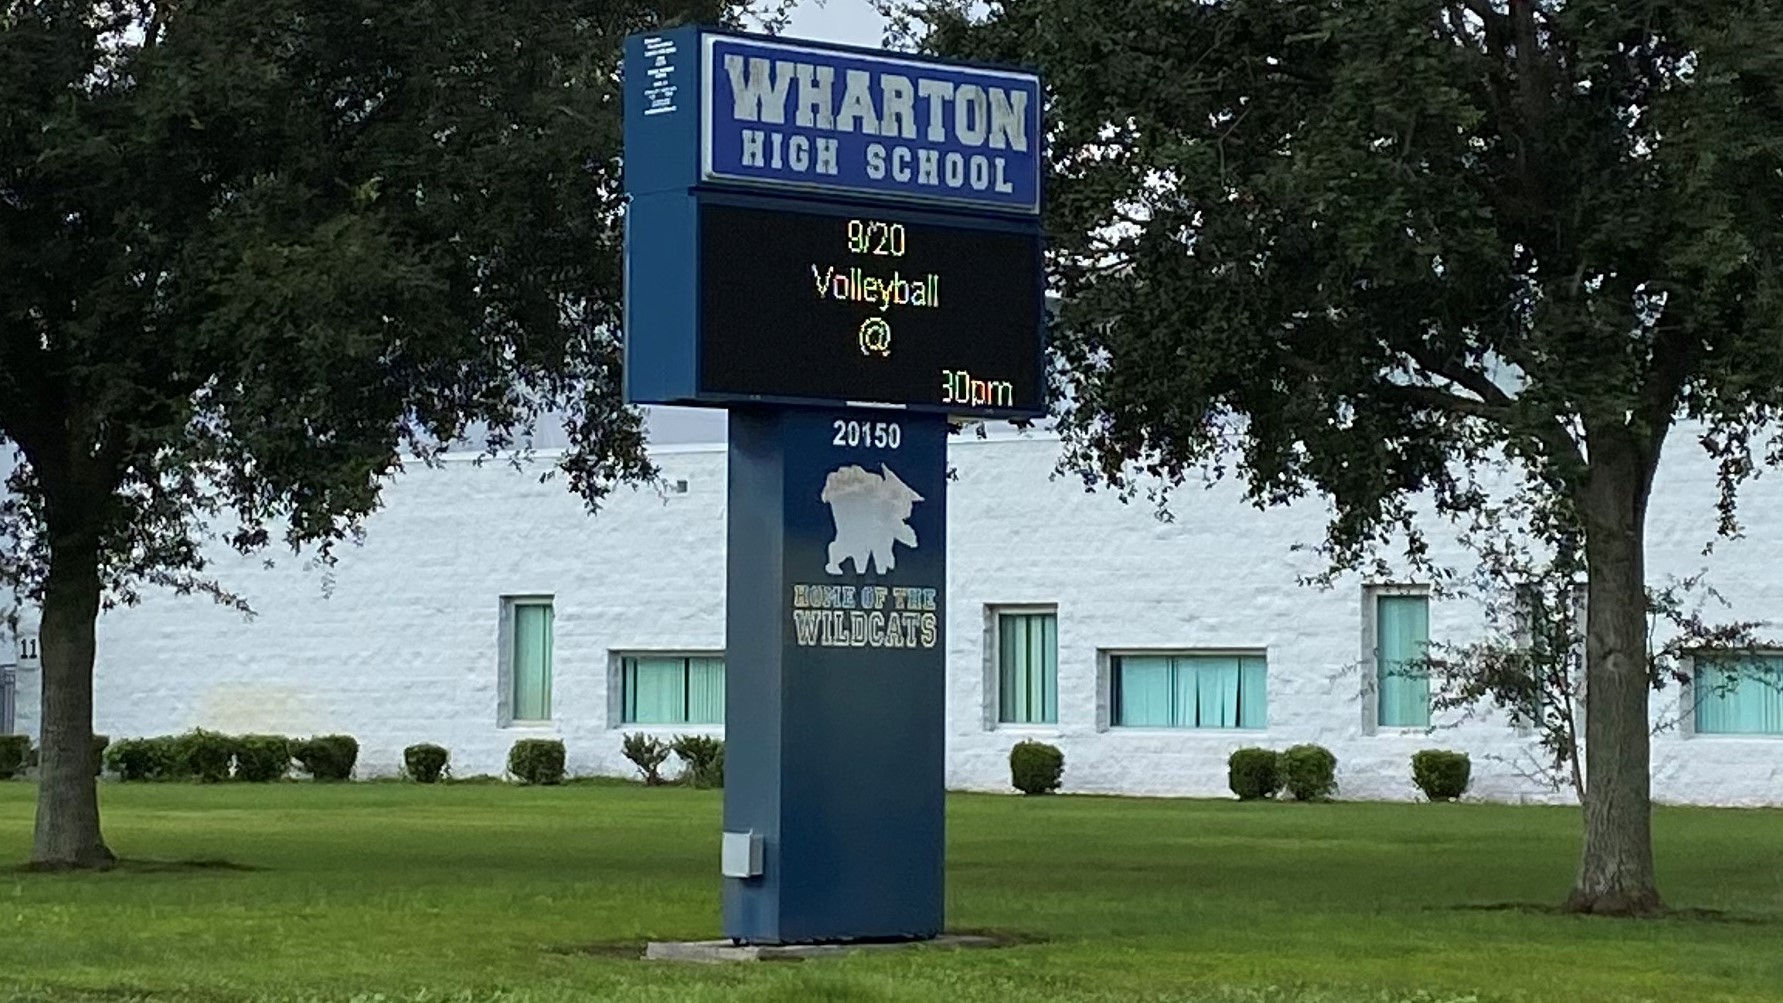 A Wharton High School sign in front of the school.